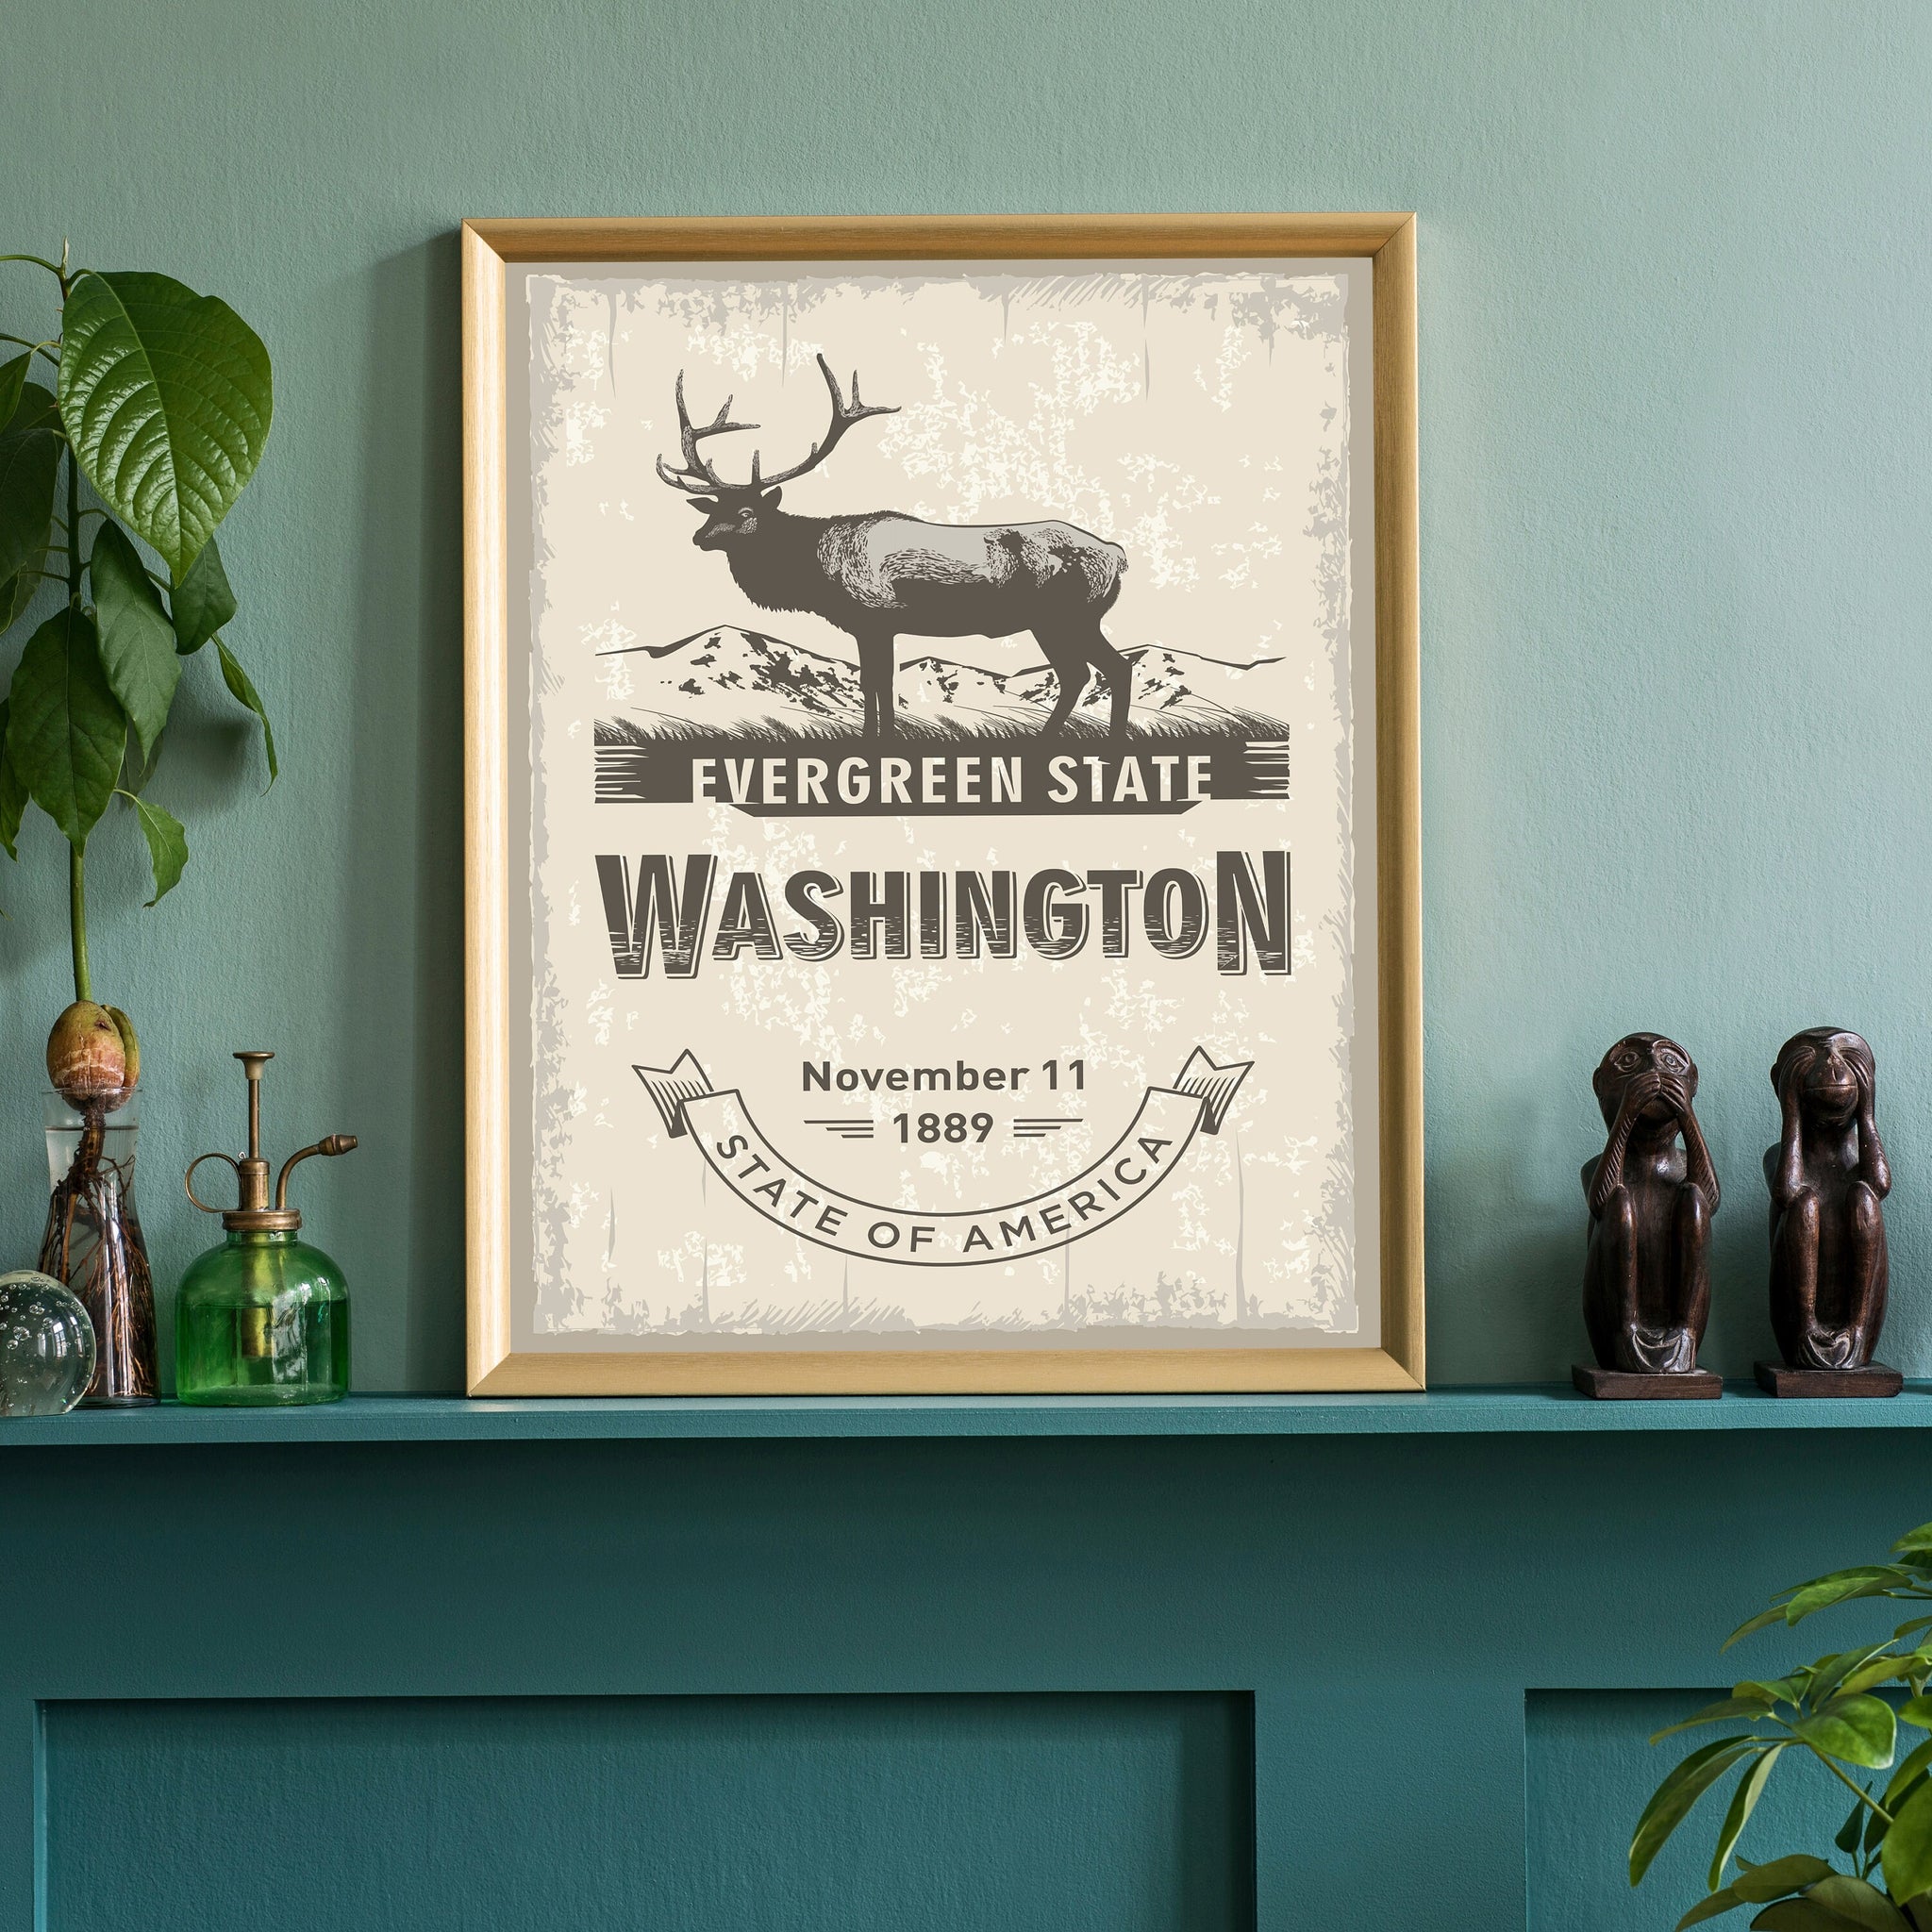 Washington State Symbol Poster, Washington Poster Print, Washington State Emblem Poster, Retro Travel State Poster, Home and Office Wall Art